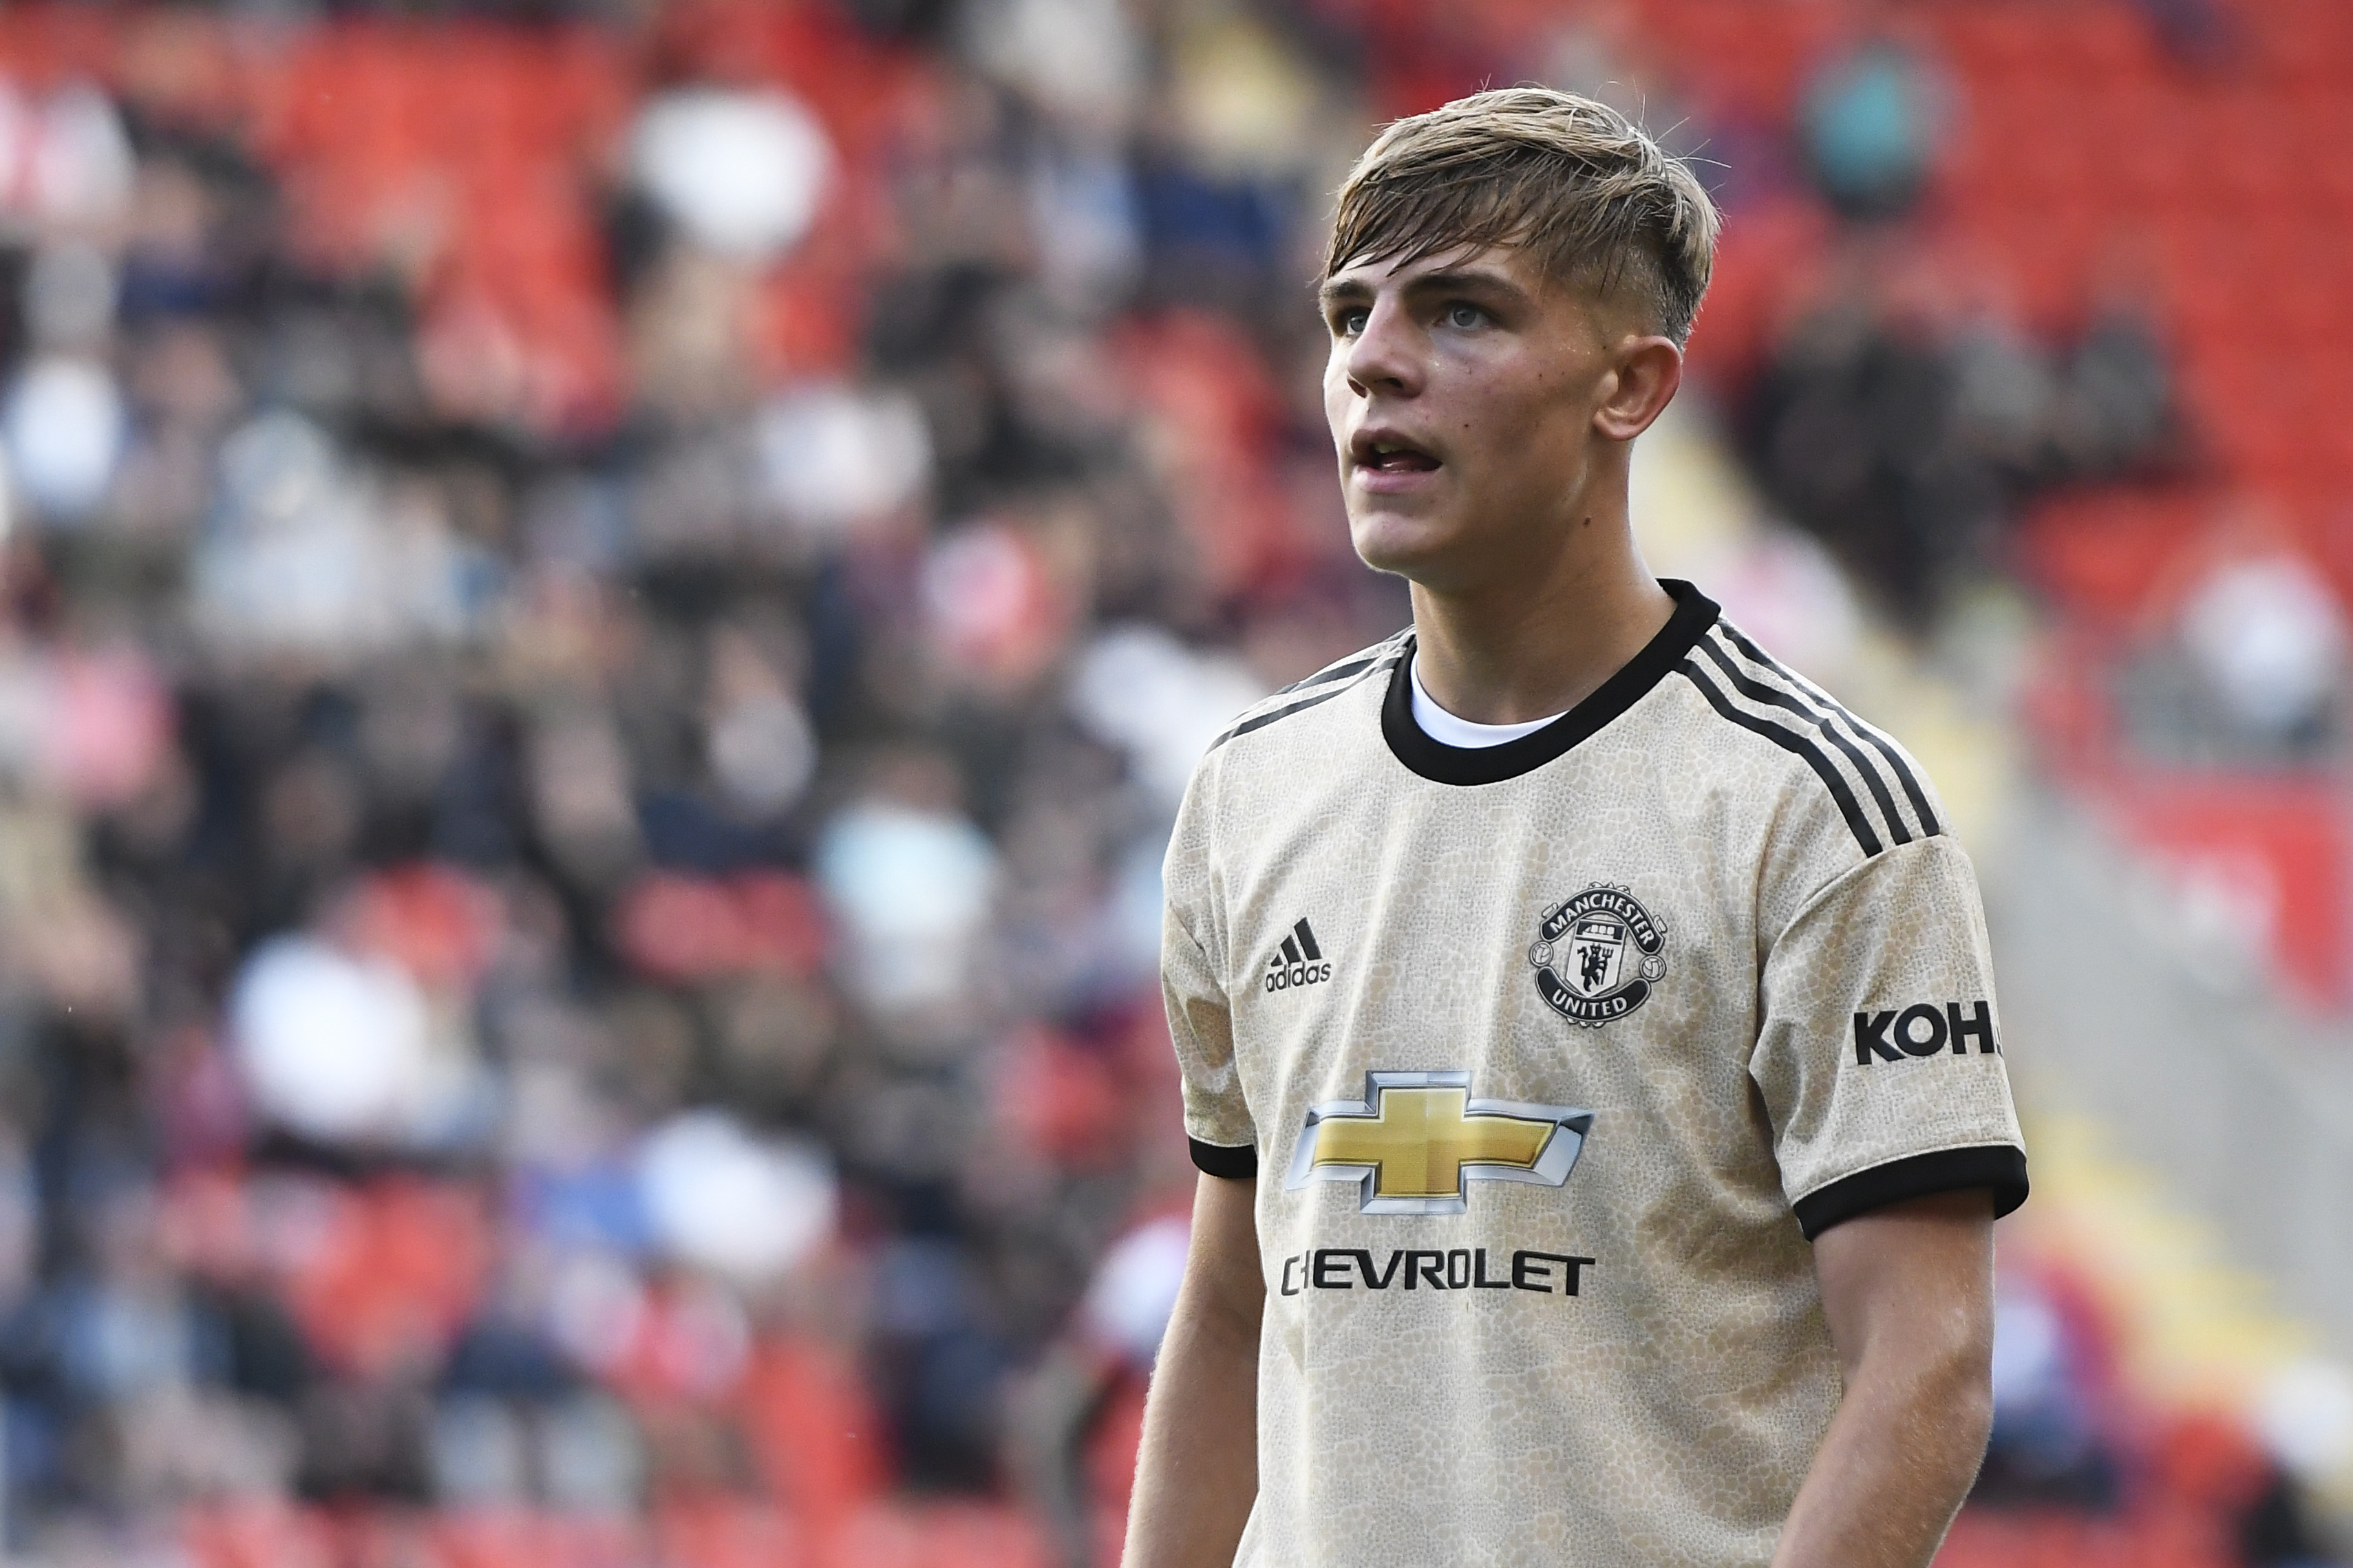 ROTHERHAM, ENGLAND - AUGUST 06: Brandon Williams of Manchester United U21 during the EFL Trophy match between Rotherham United and Manchester United U21 at AESSEAL New York Stadium on August 6, 2019 in Rotherham, England. (Photo by George Wood/Getty Images)